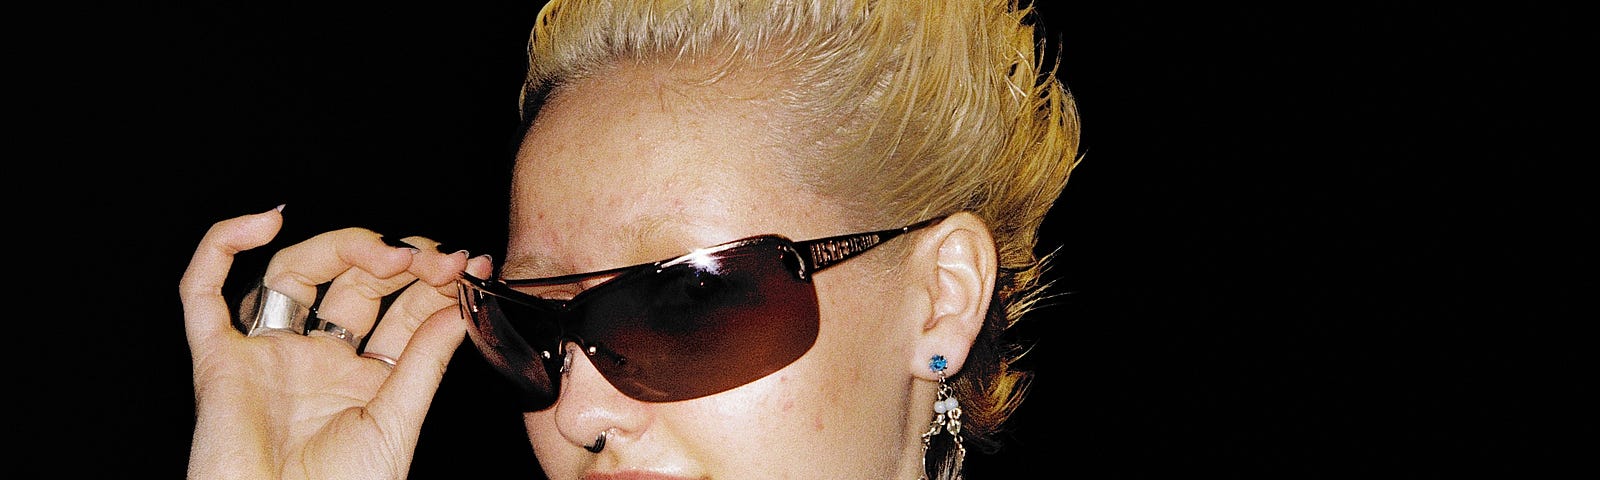 headshot of a woman with blonde hair and sunglasses